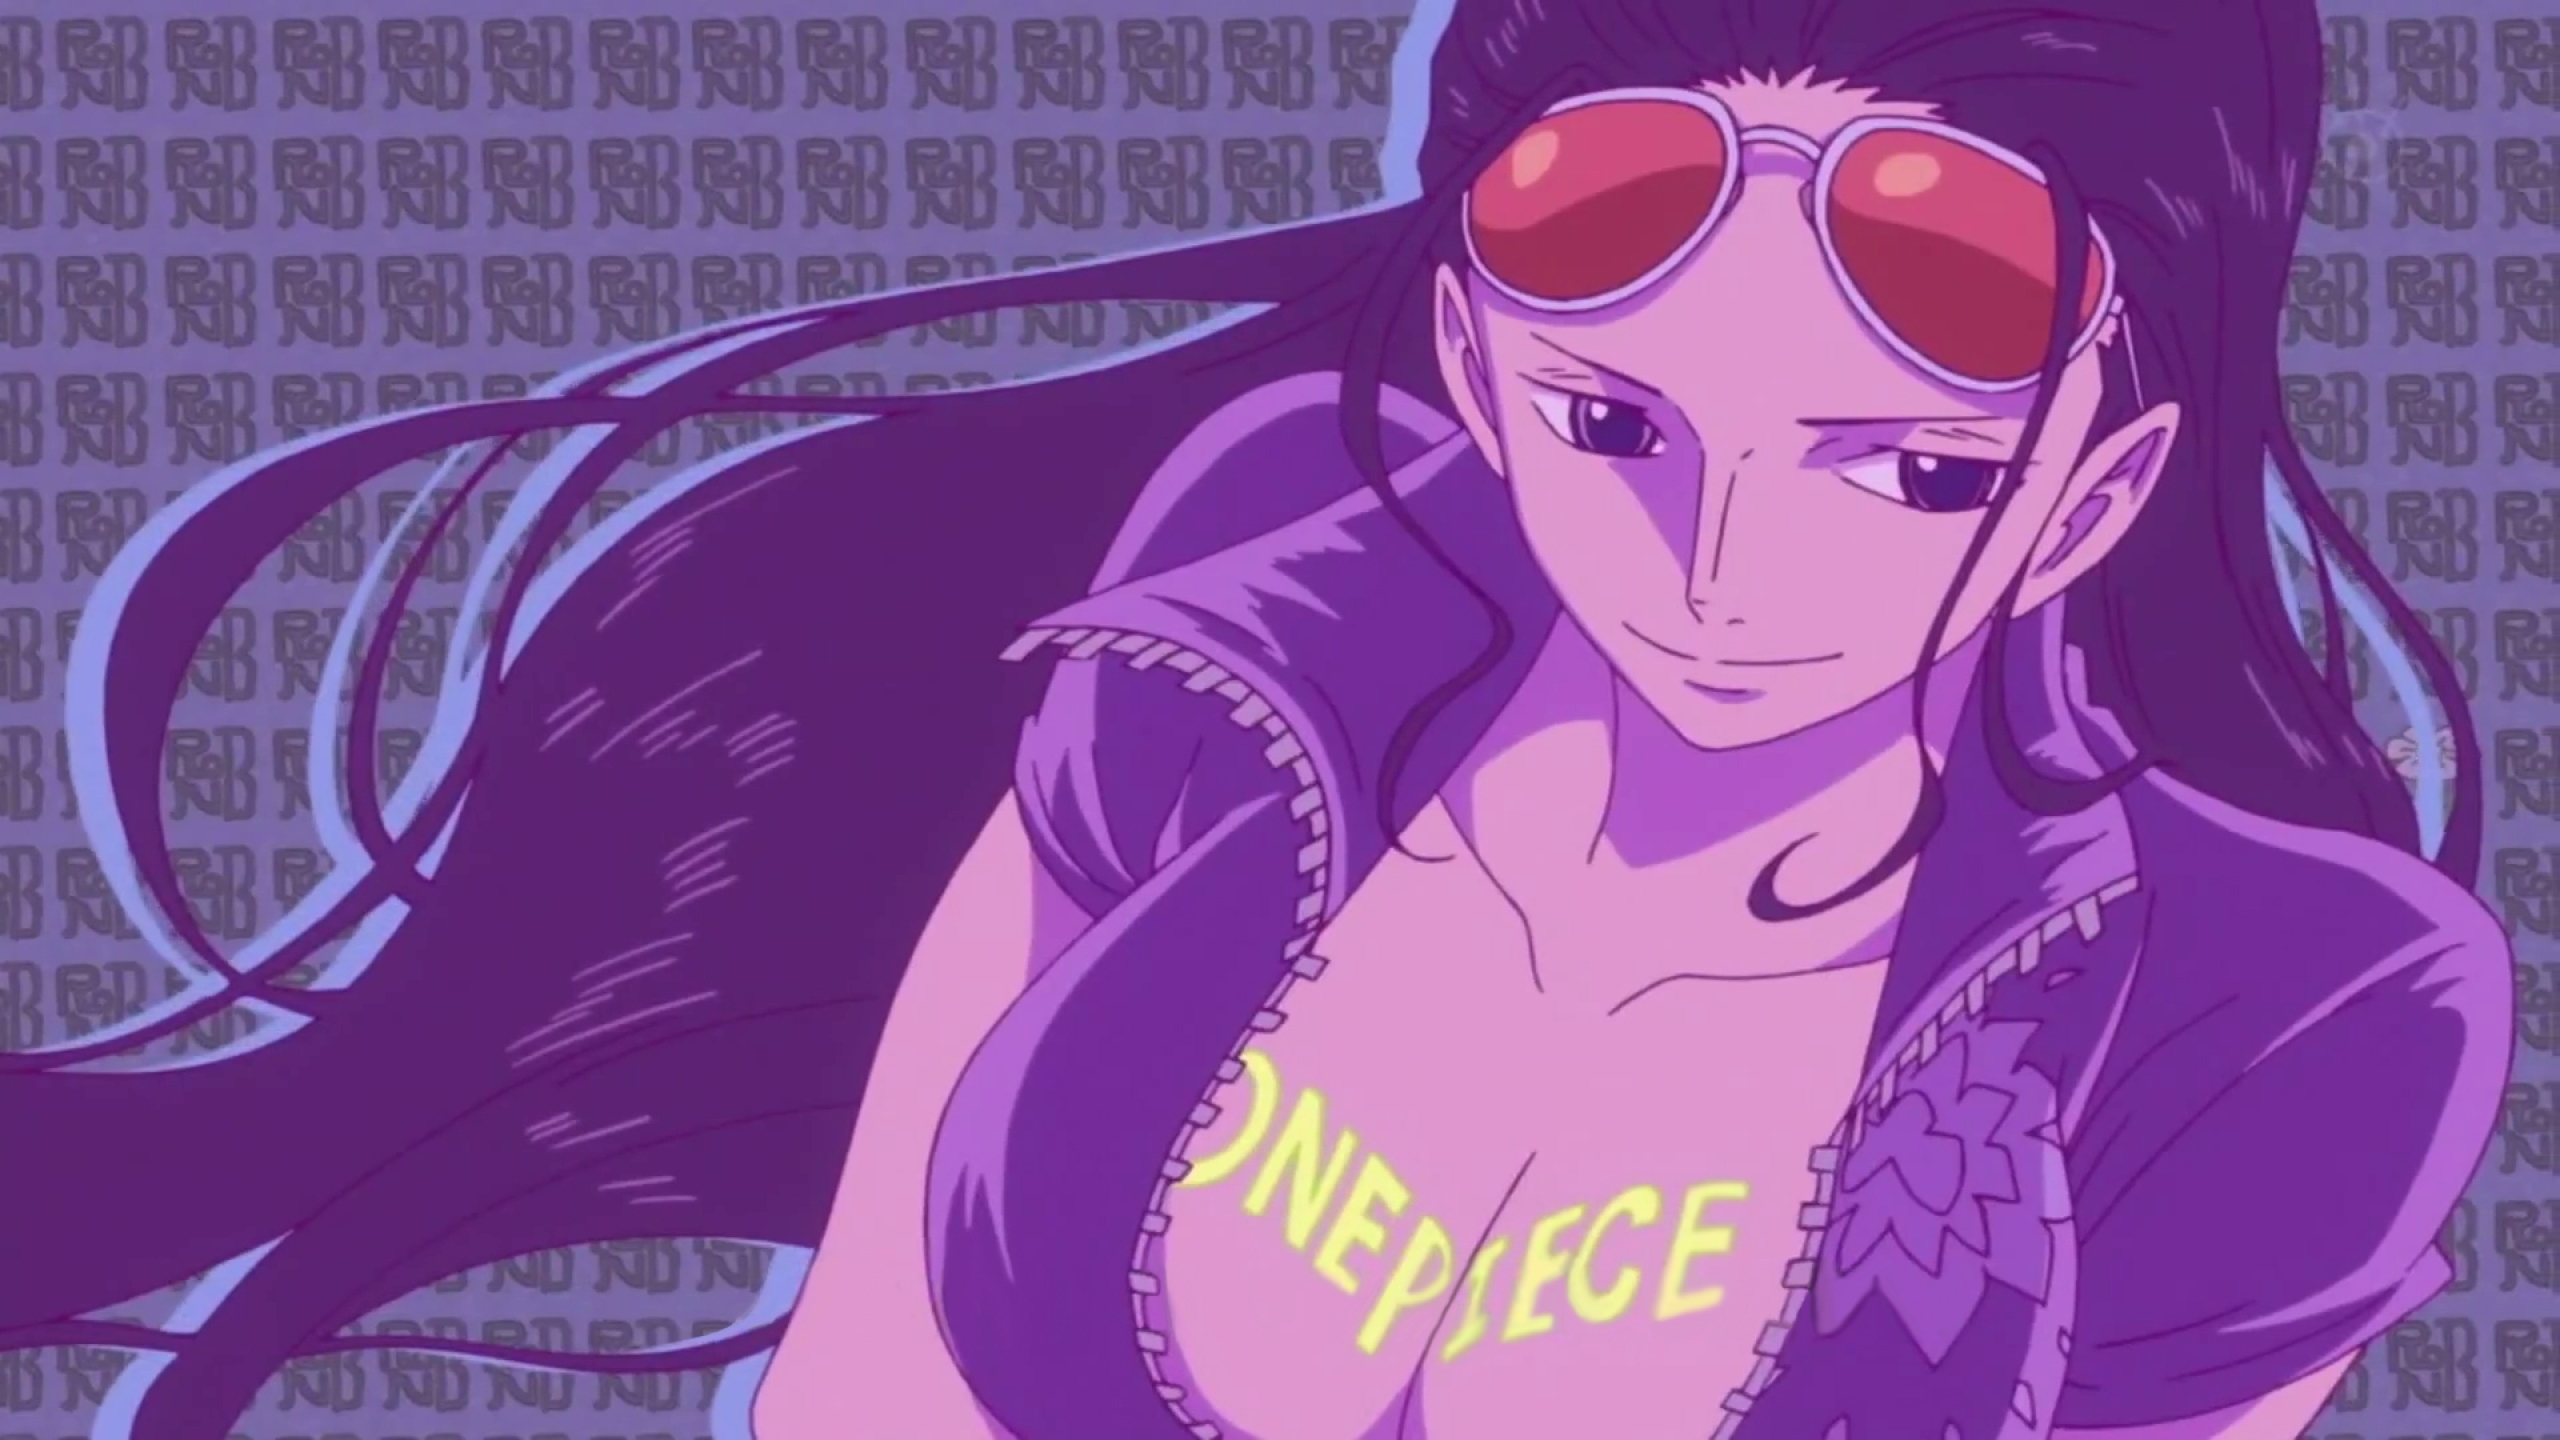 19 Nico Robin Wallpapers for iPhone and Android by Carla Carrillo